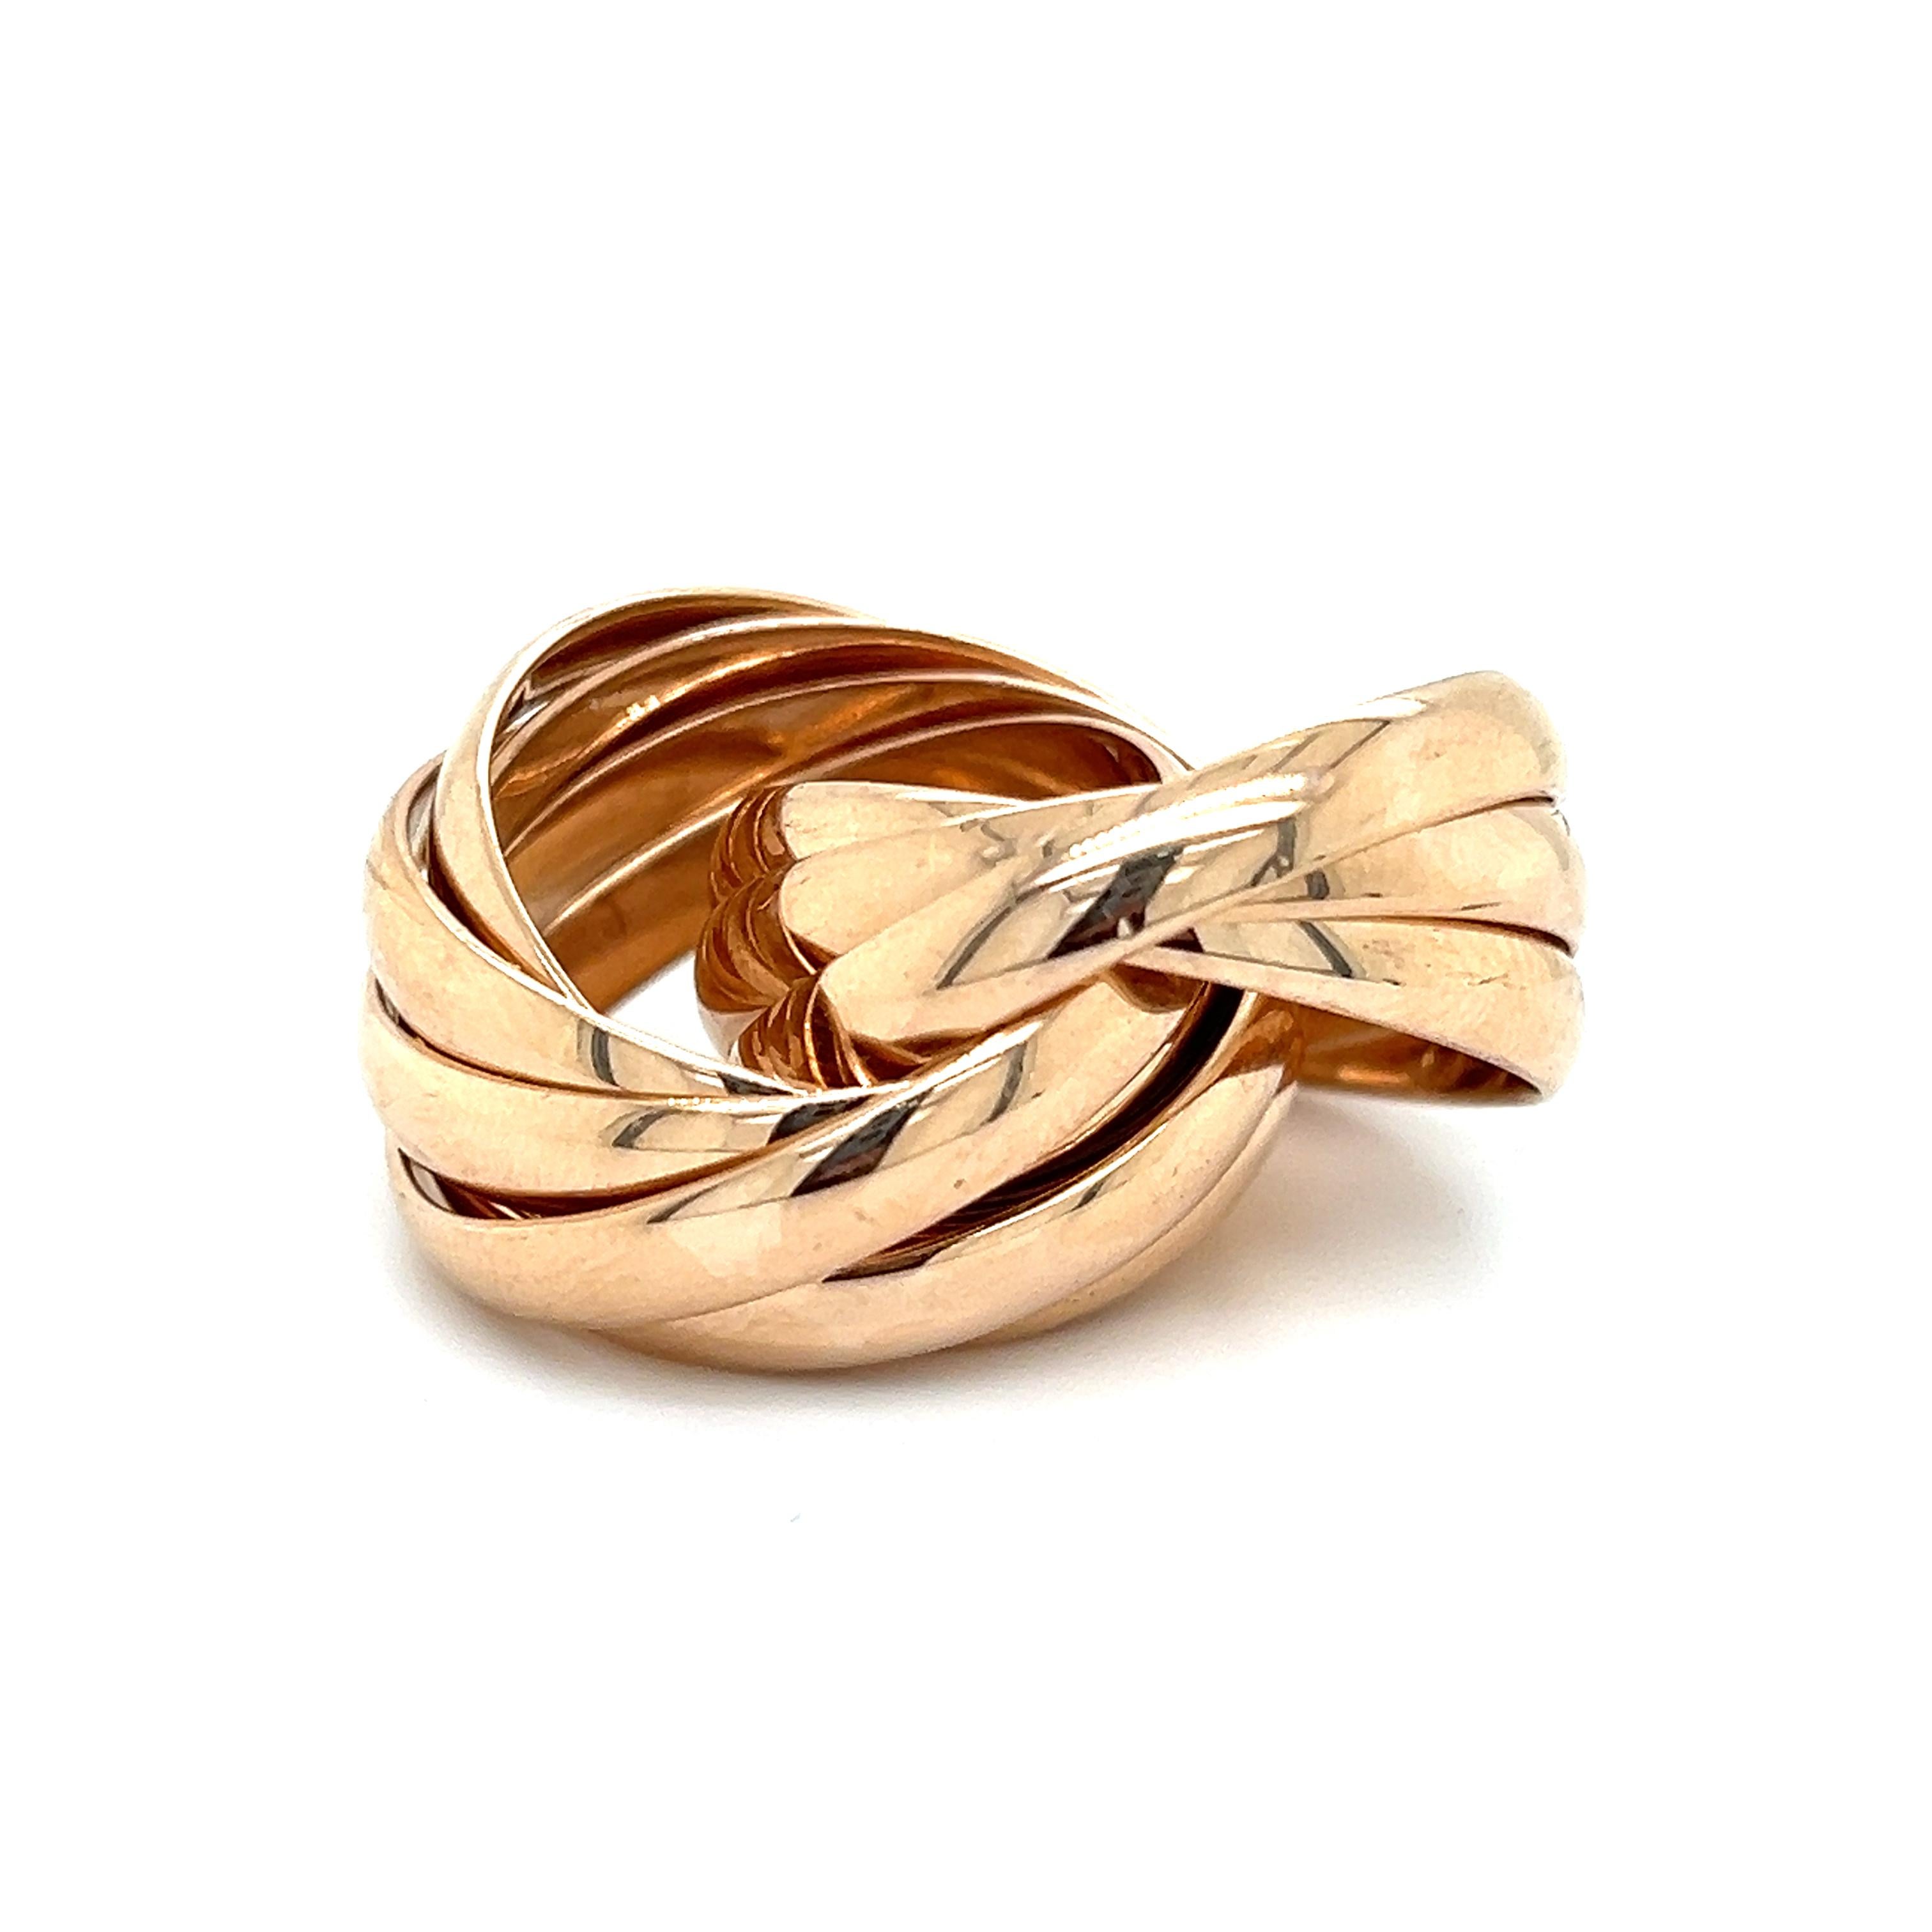 Beautiful Tiffany & Co. ring by Paloma Picasso from her famed Melody collection. The ring is truly unique as 9 bands  crafted in luscious 18k rose gold interlock to form this unique stand out design. This ring is extremely durable as it weighs 30.5